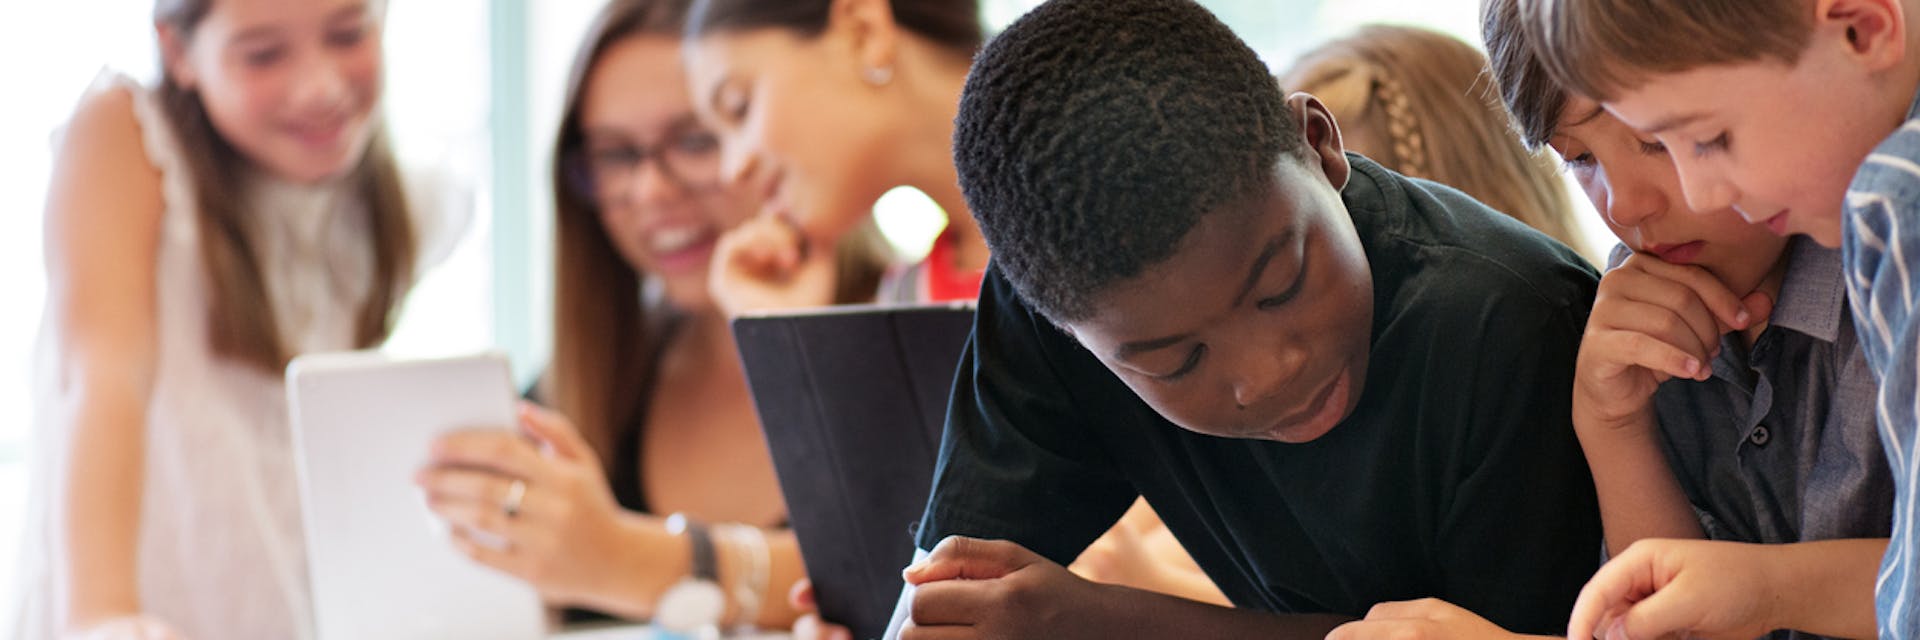 Why Student-Centered Learning Is Important And How Prodigy Can Help |  Prodigy Education